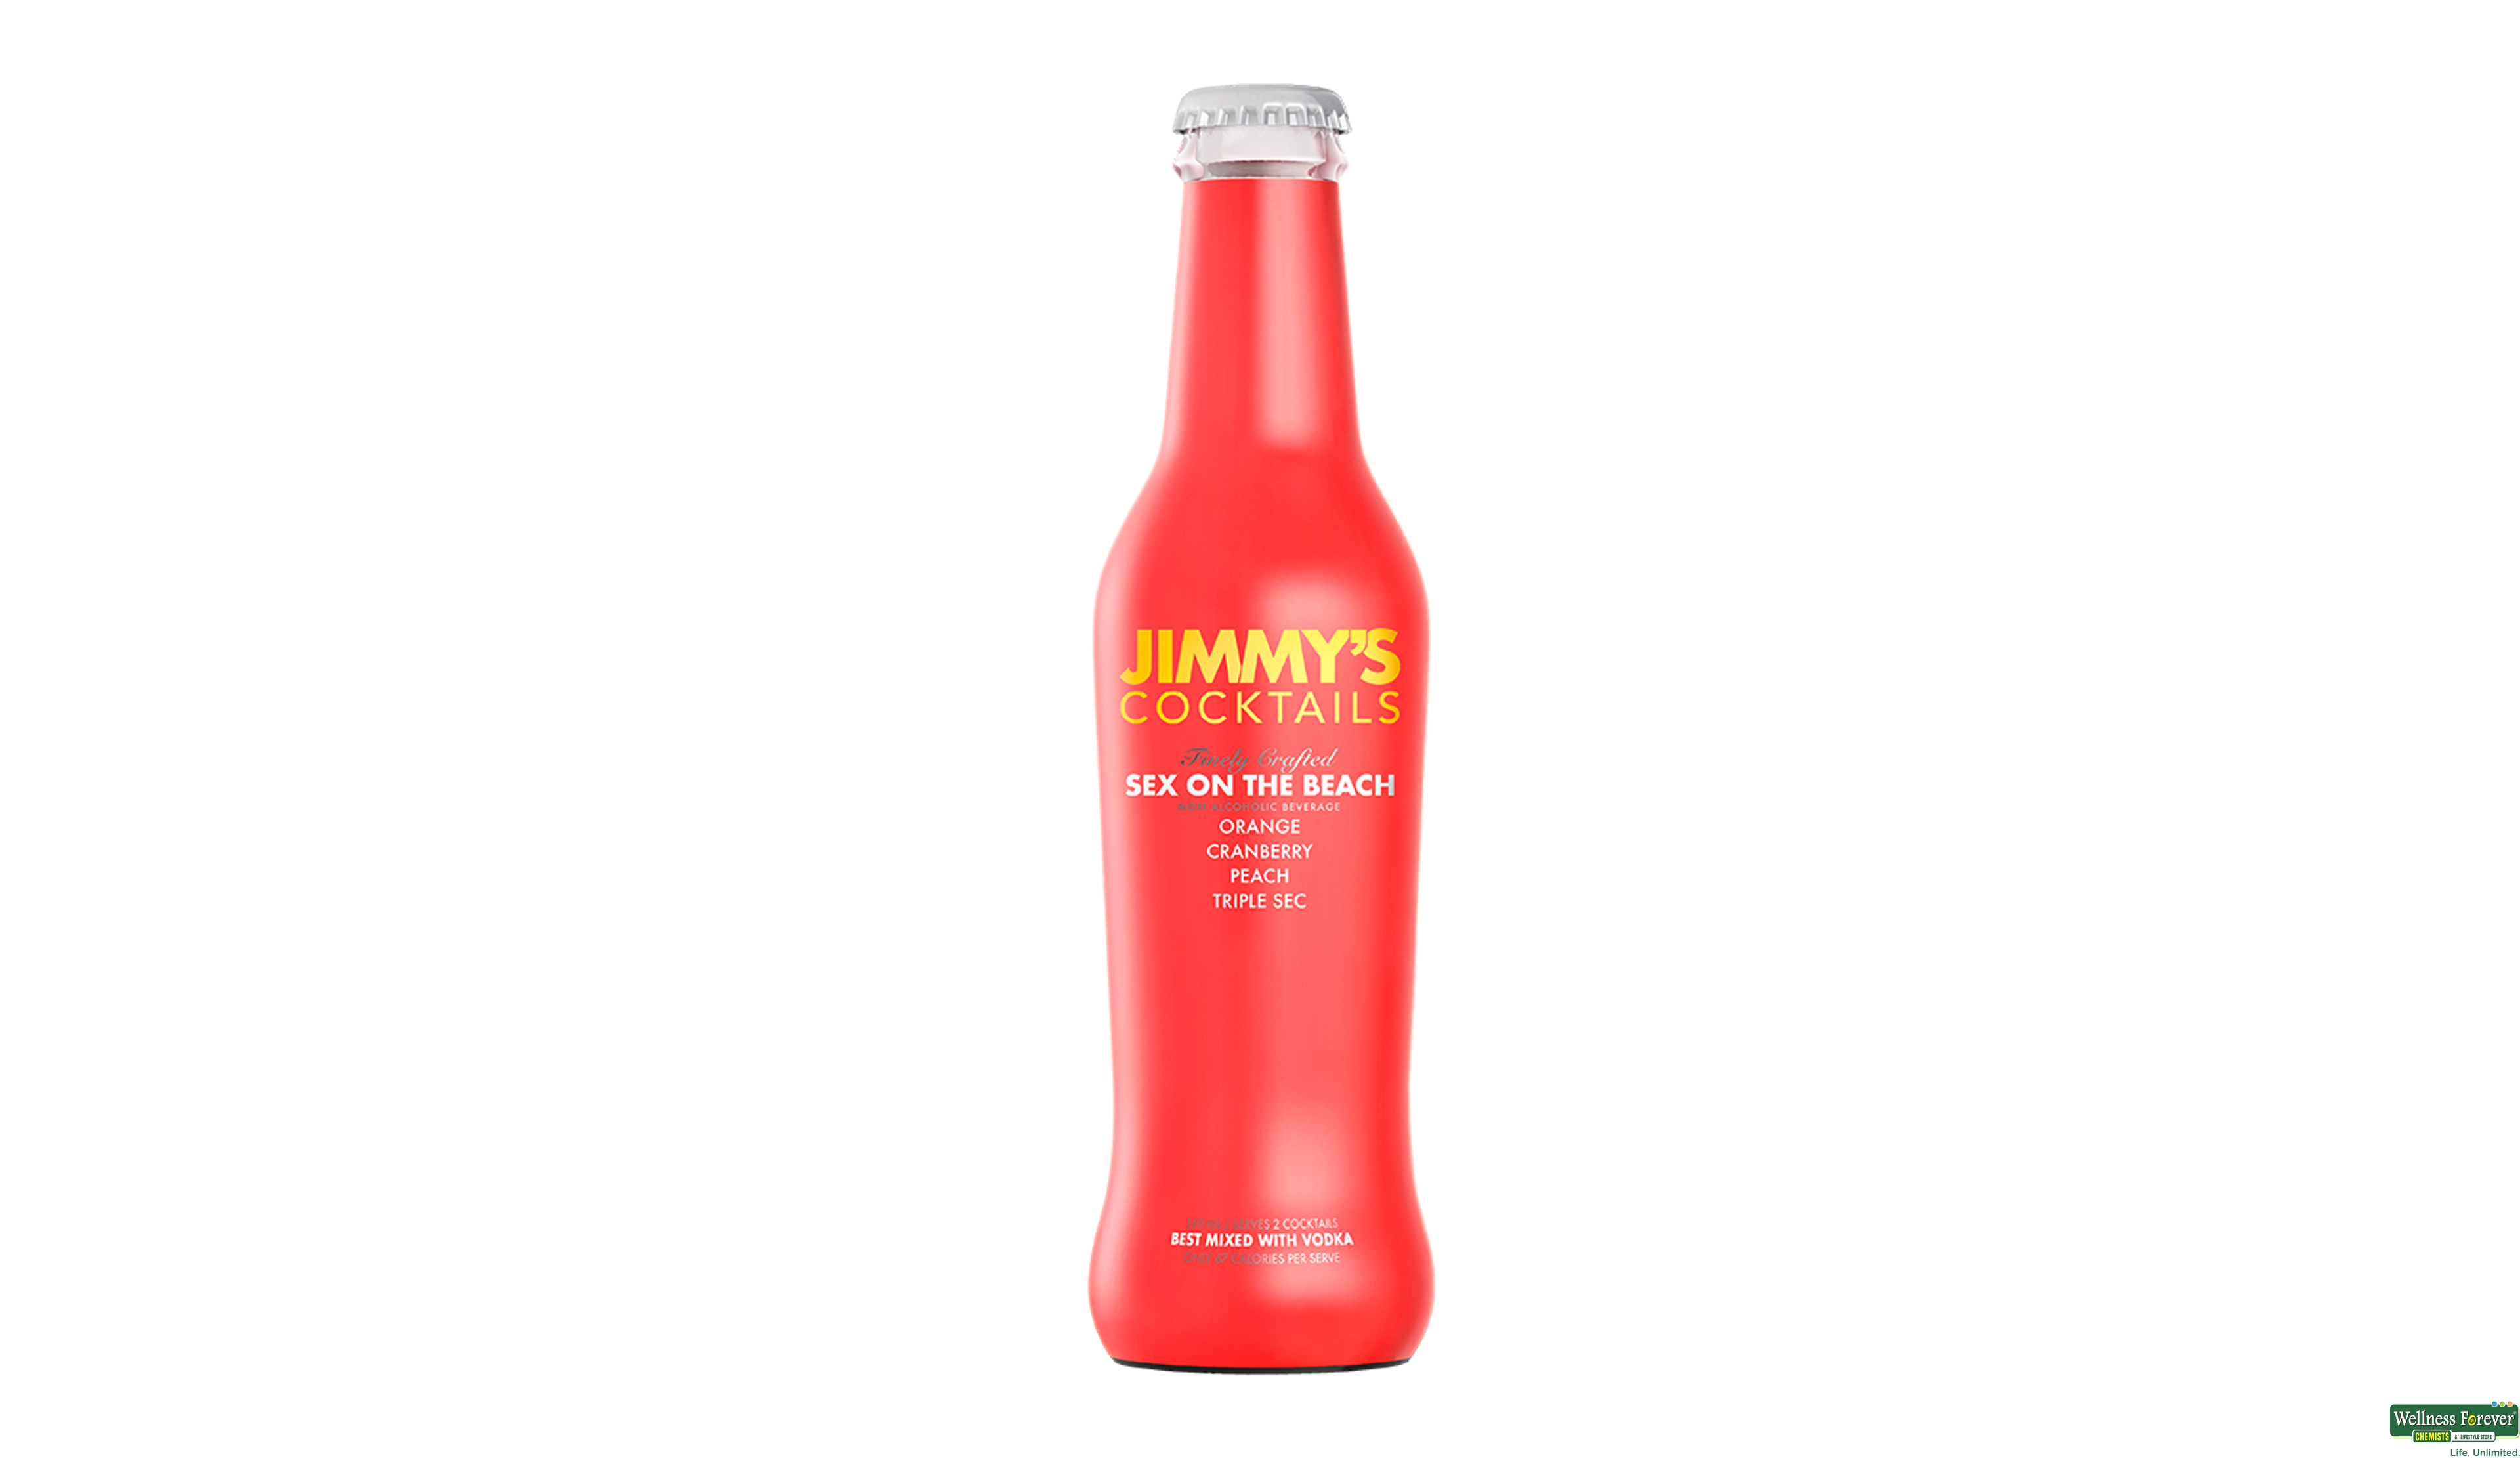 JIMMYS COCKTAILS ON THE BEACH 250ML- 1, 250ML, 